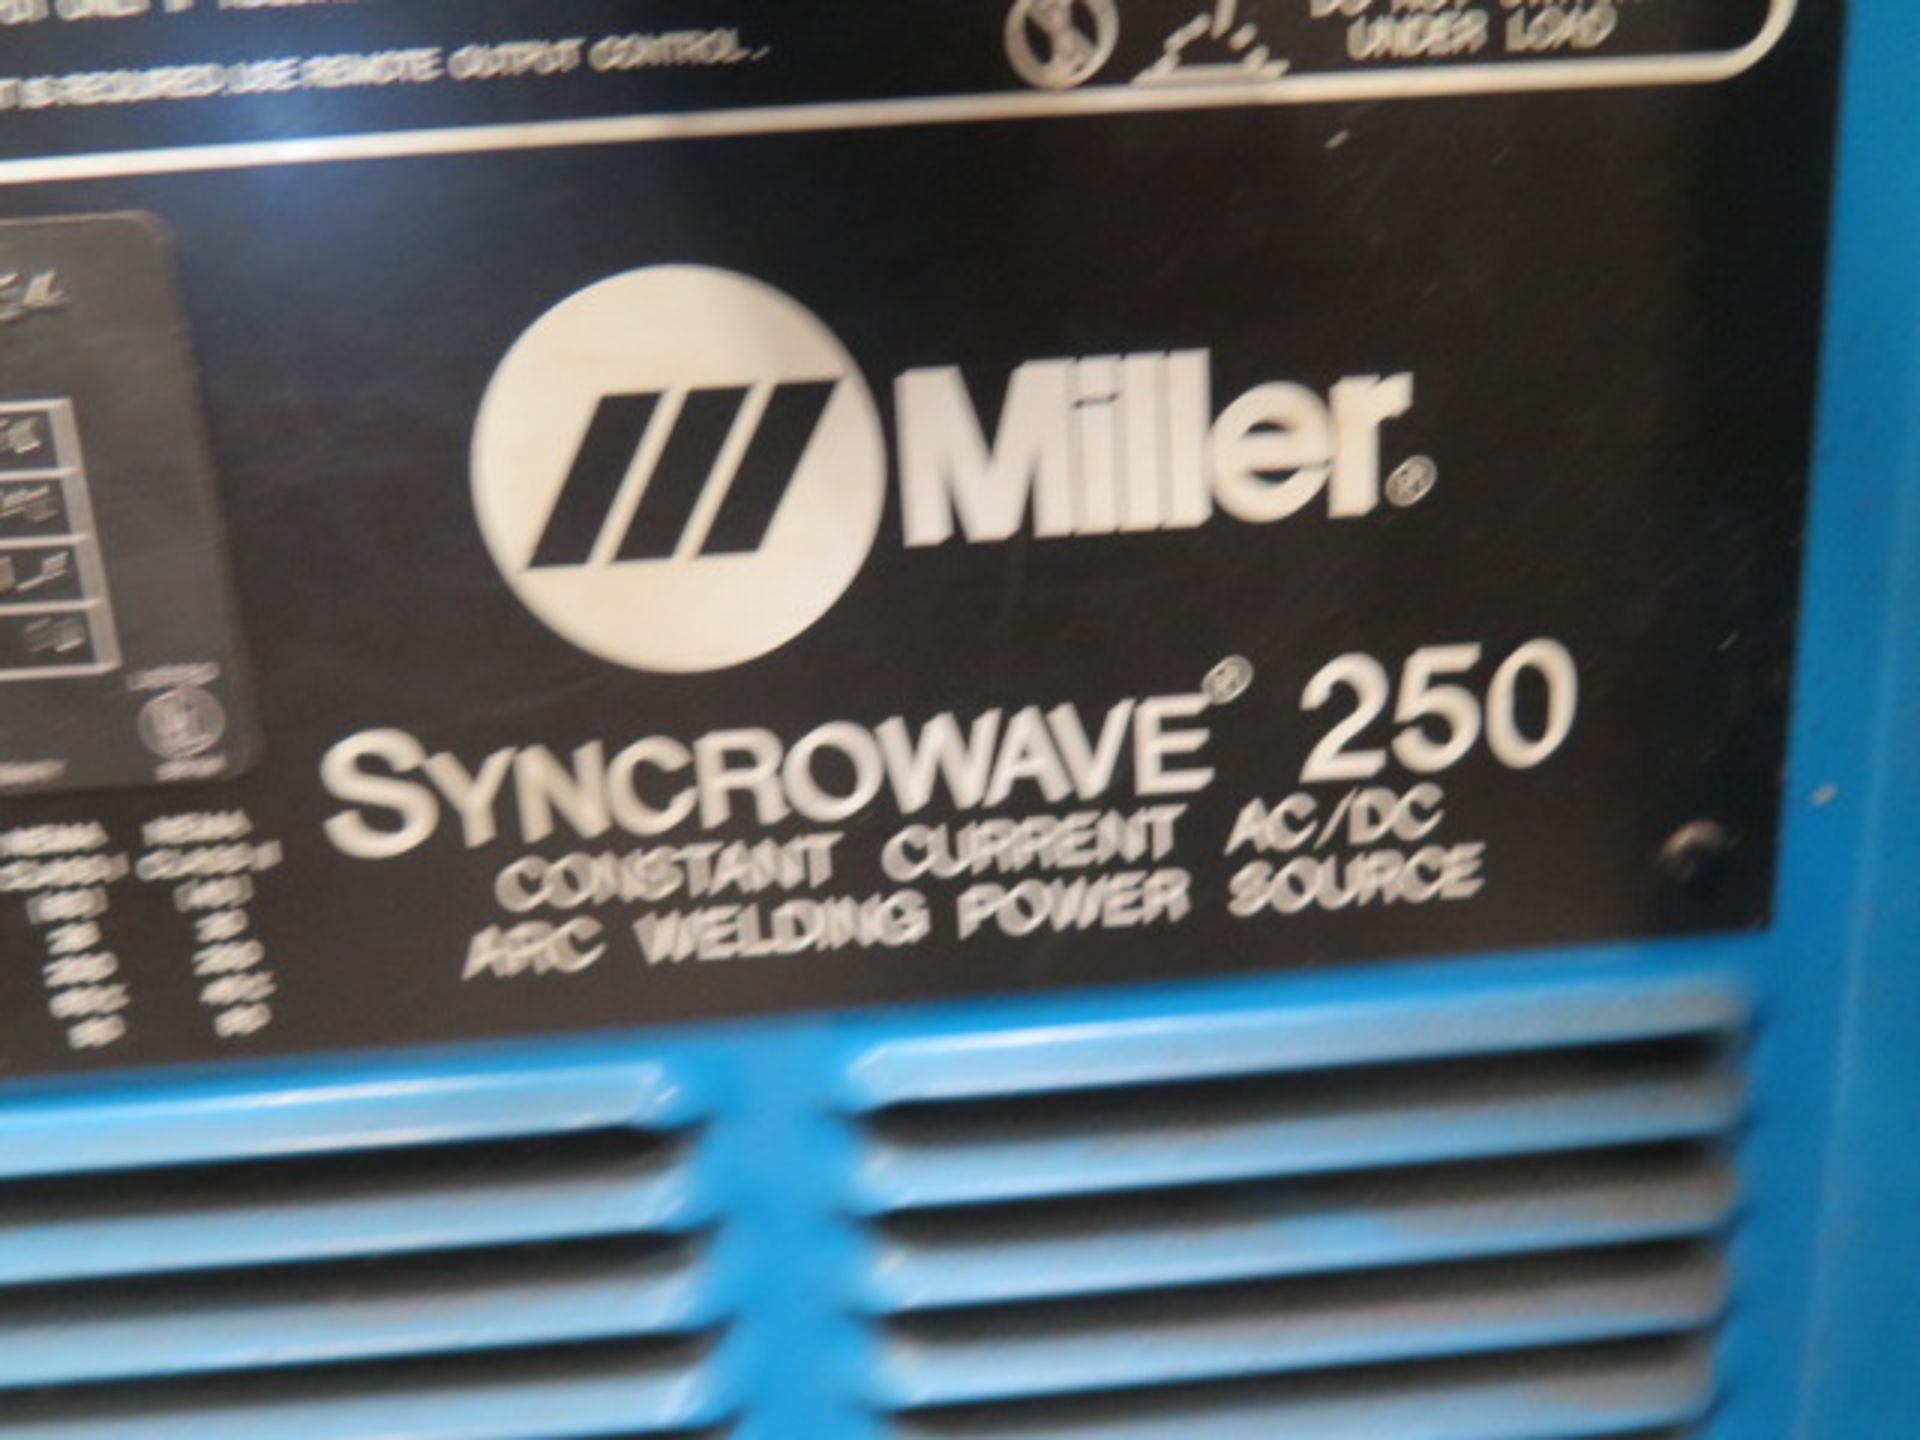 Miller Syncrowave 250 CC-AC/DC Arc Welding Power Source s/n KD474664 w/ Miller Coolmate 1A Cooling - Image 7 of 7